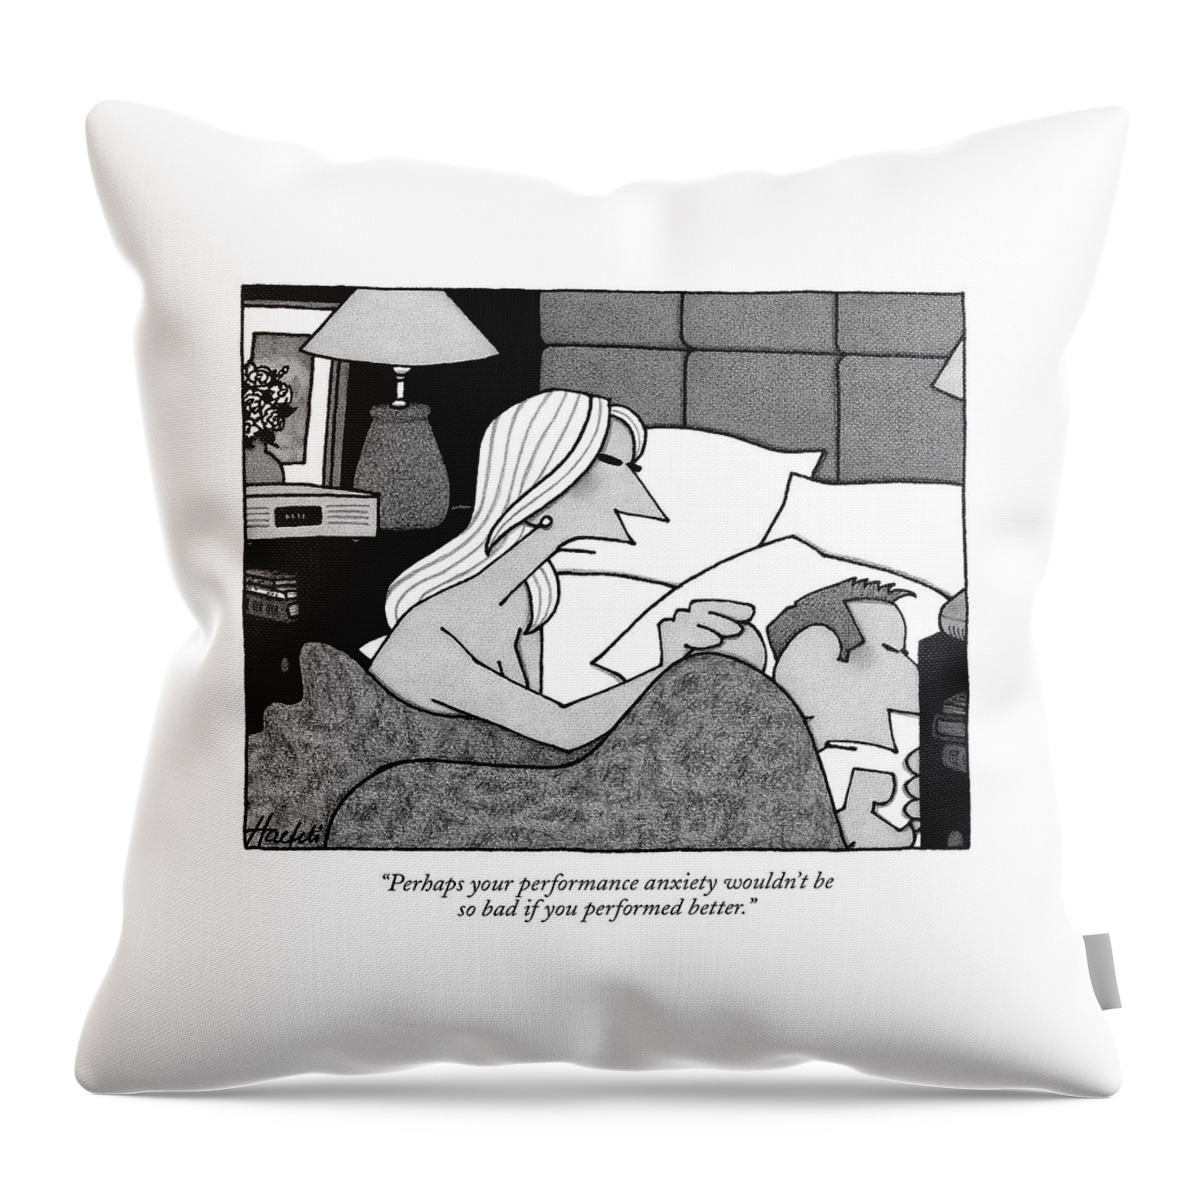 Perhaps Your Performance Anxiety Wouldn't Throw Pillow